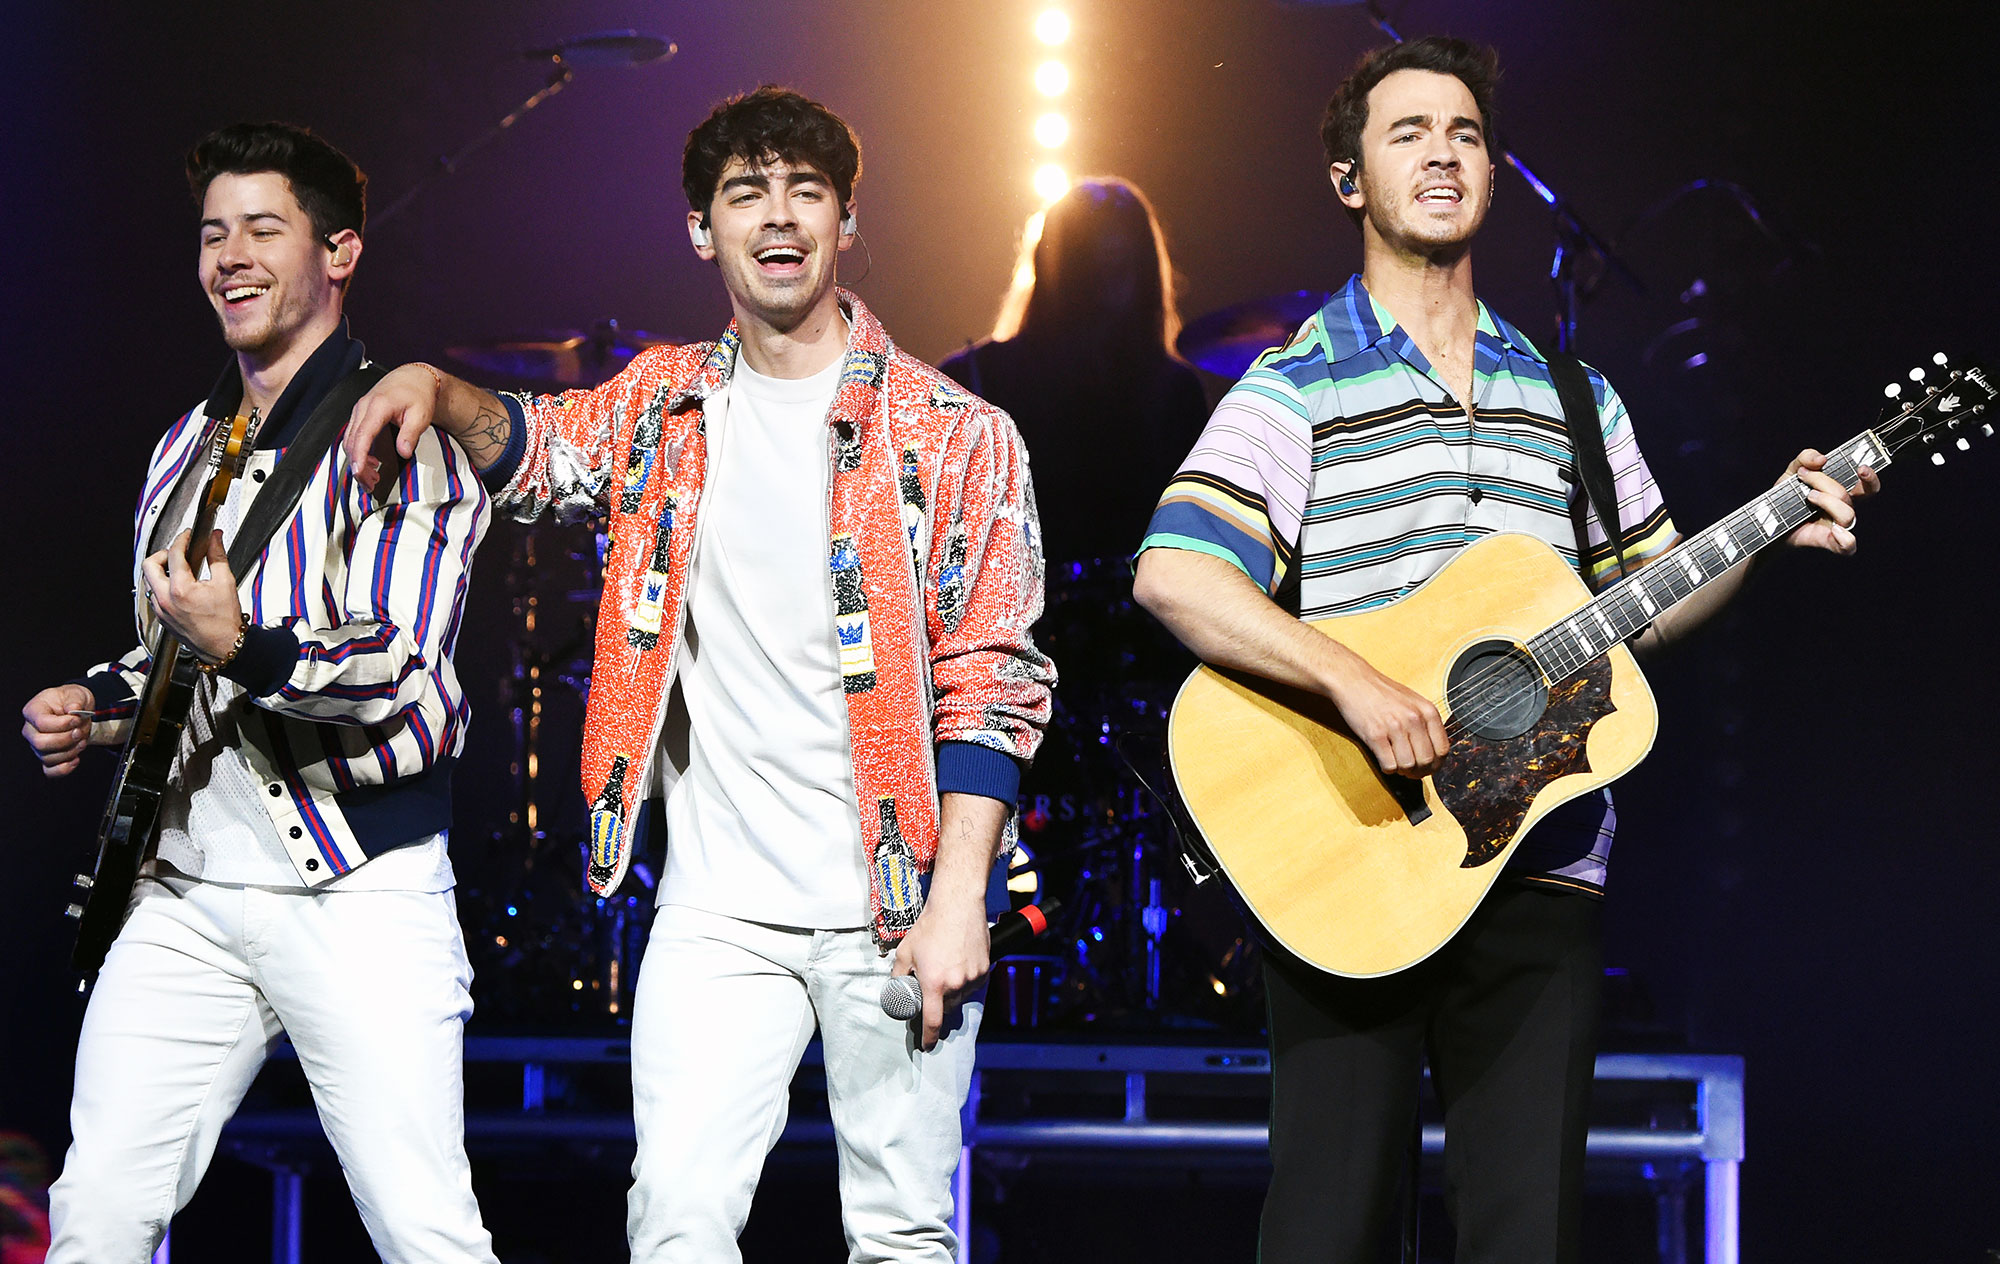 jonas brothers tour who is opening